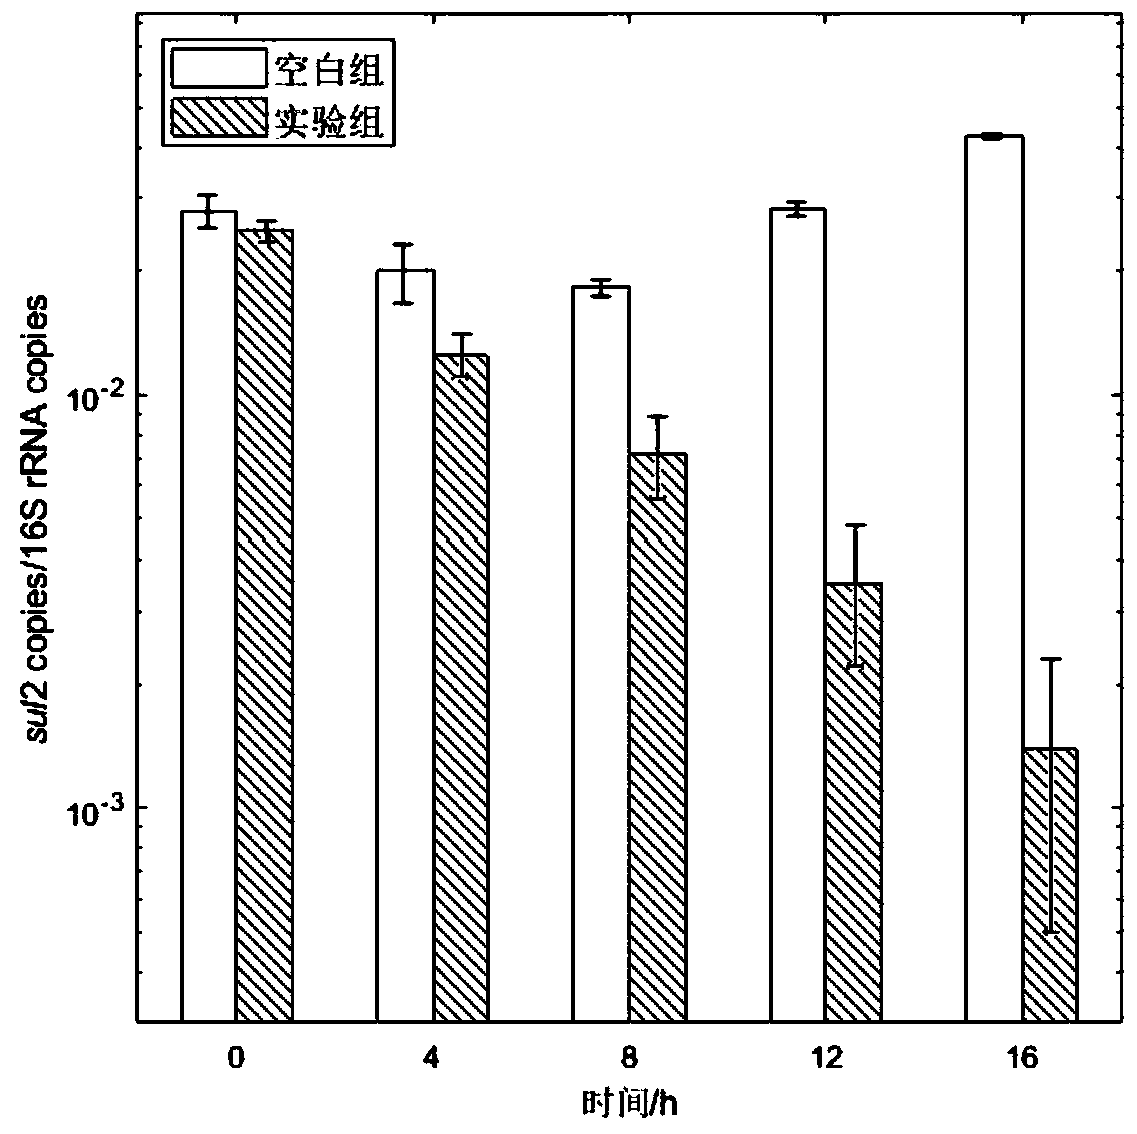 Methods of using microbial cleavage reactions to reduce abundance of multiple antibiotic resistance genes in excess sludge and limit their level transfer